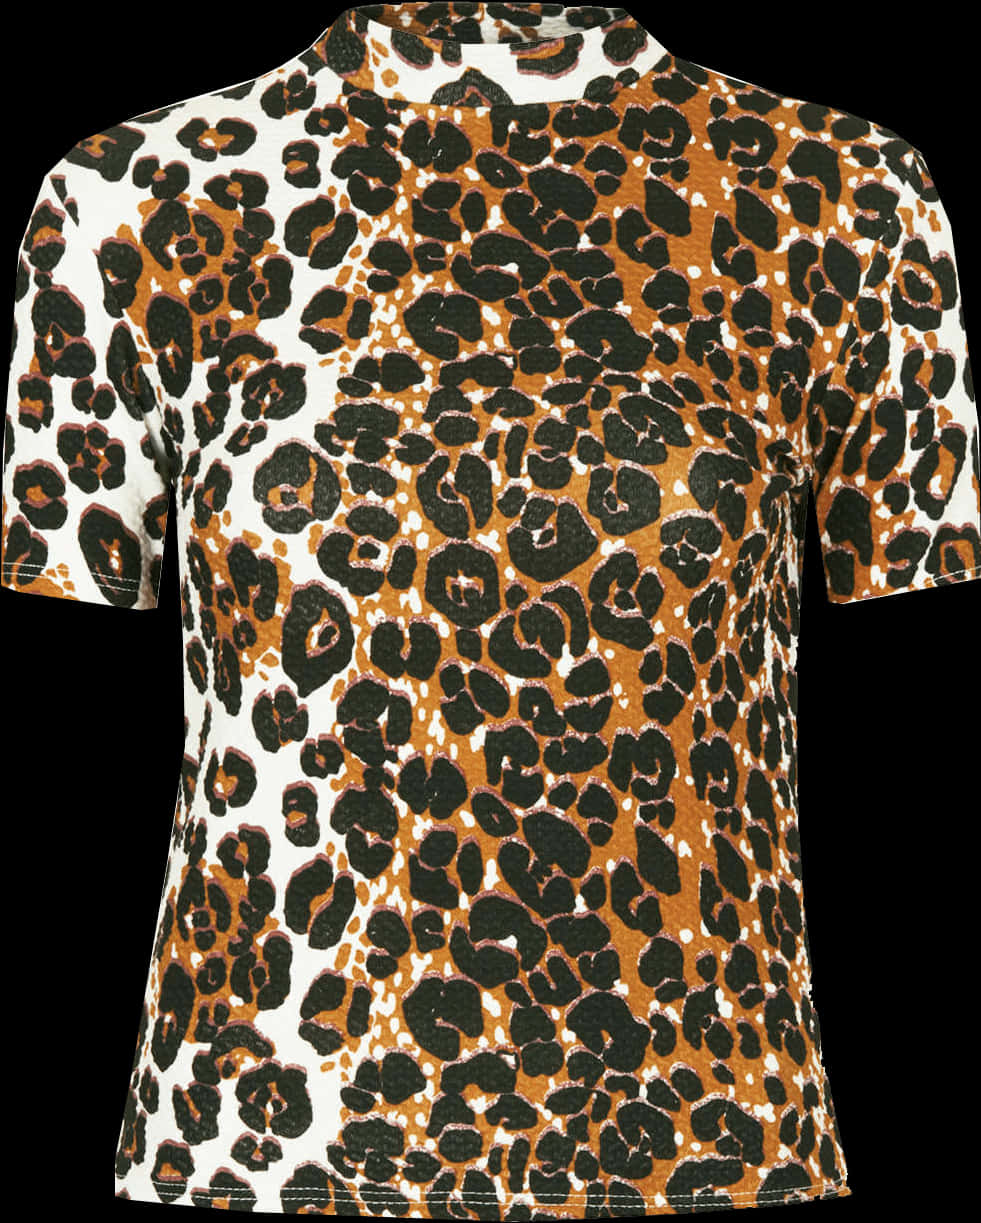 A Shirt With A Black And Brown Animal Print